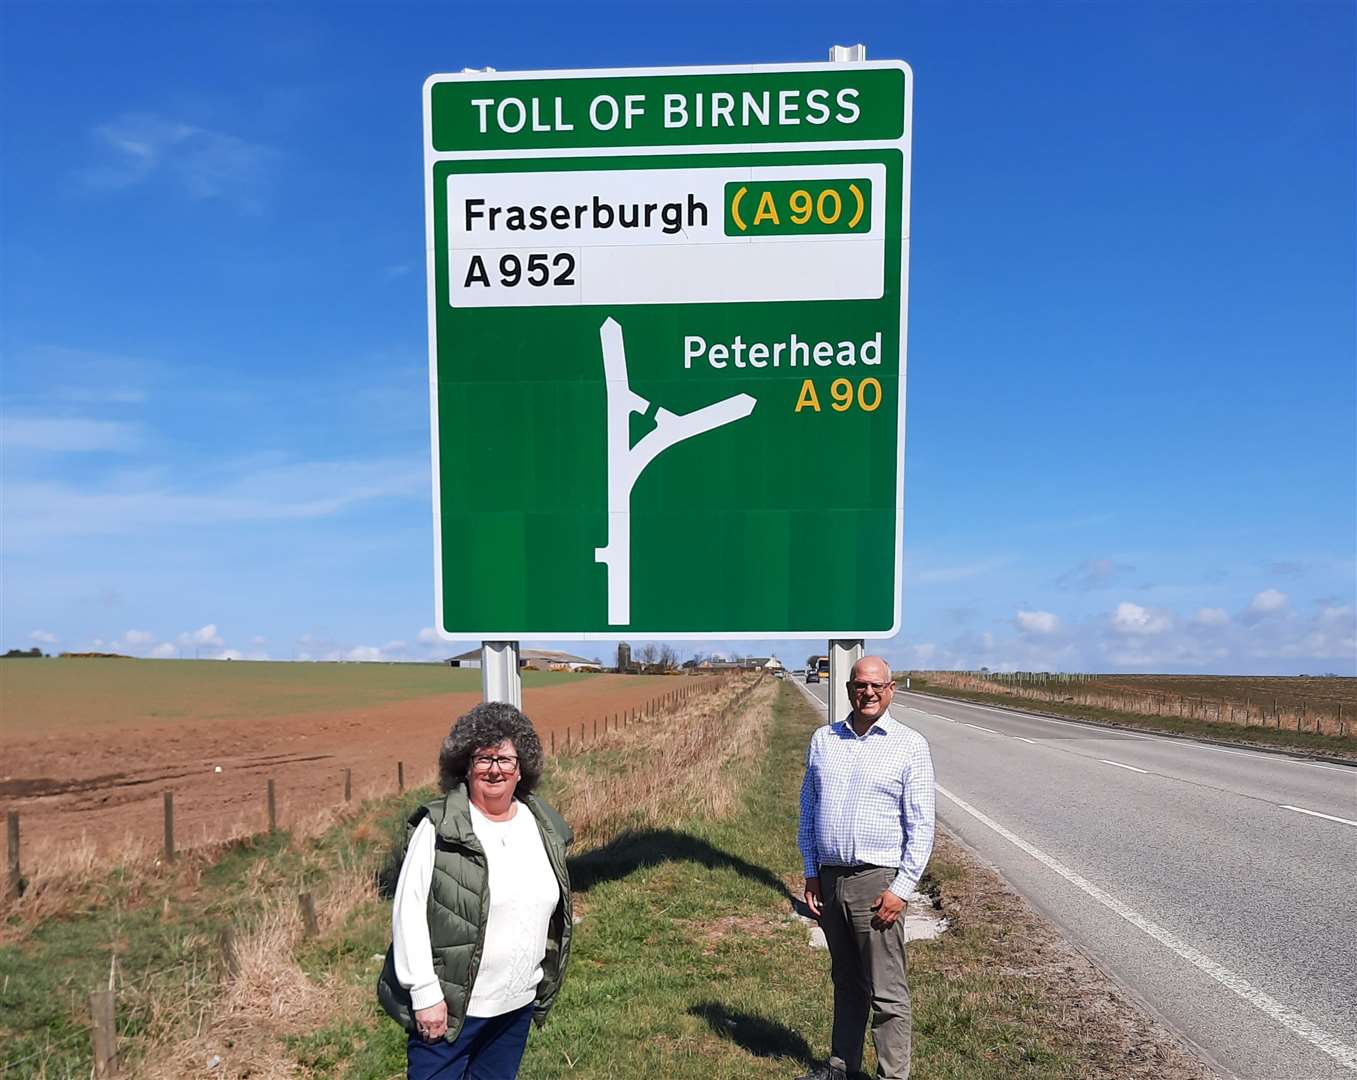 Stewart Whyte and Gillian Owen at the A90 Toll of Birness.